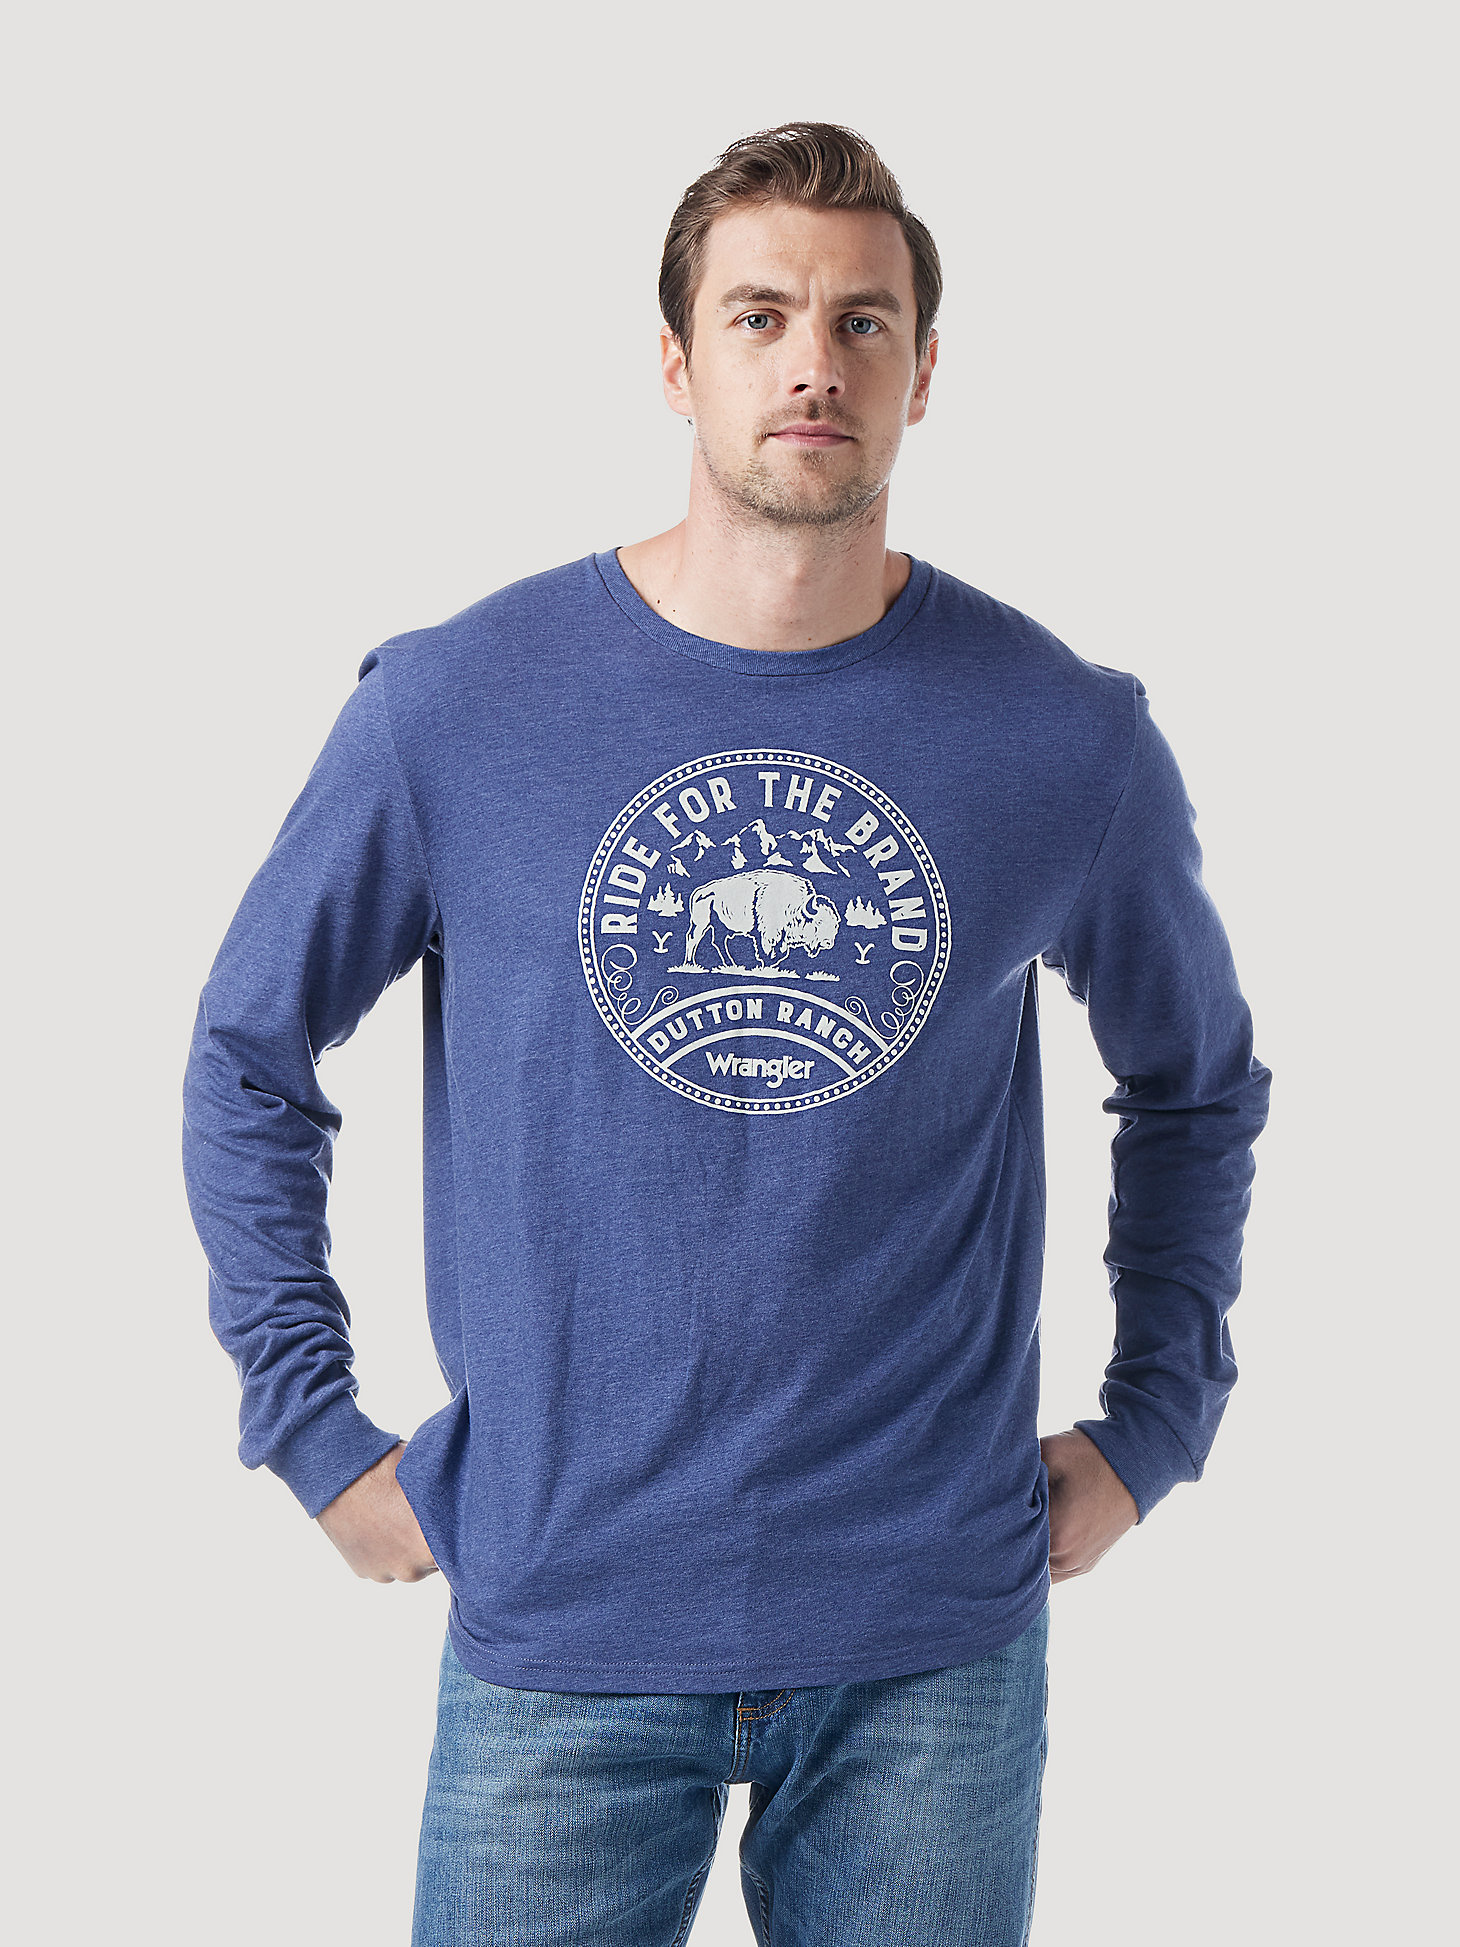 Wrangler x Yellowstone Ride for the Brand Long Sleeve T-Shirt in Denim Heather alternative view 1